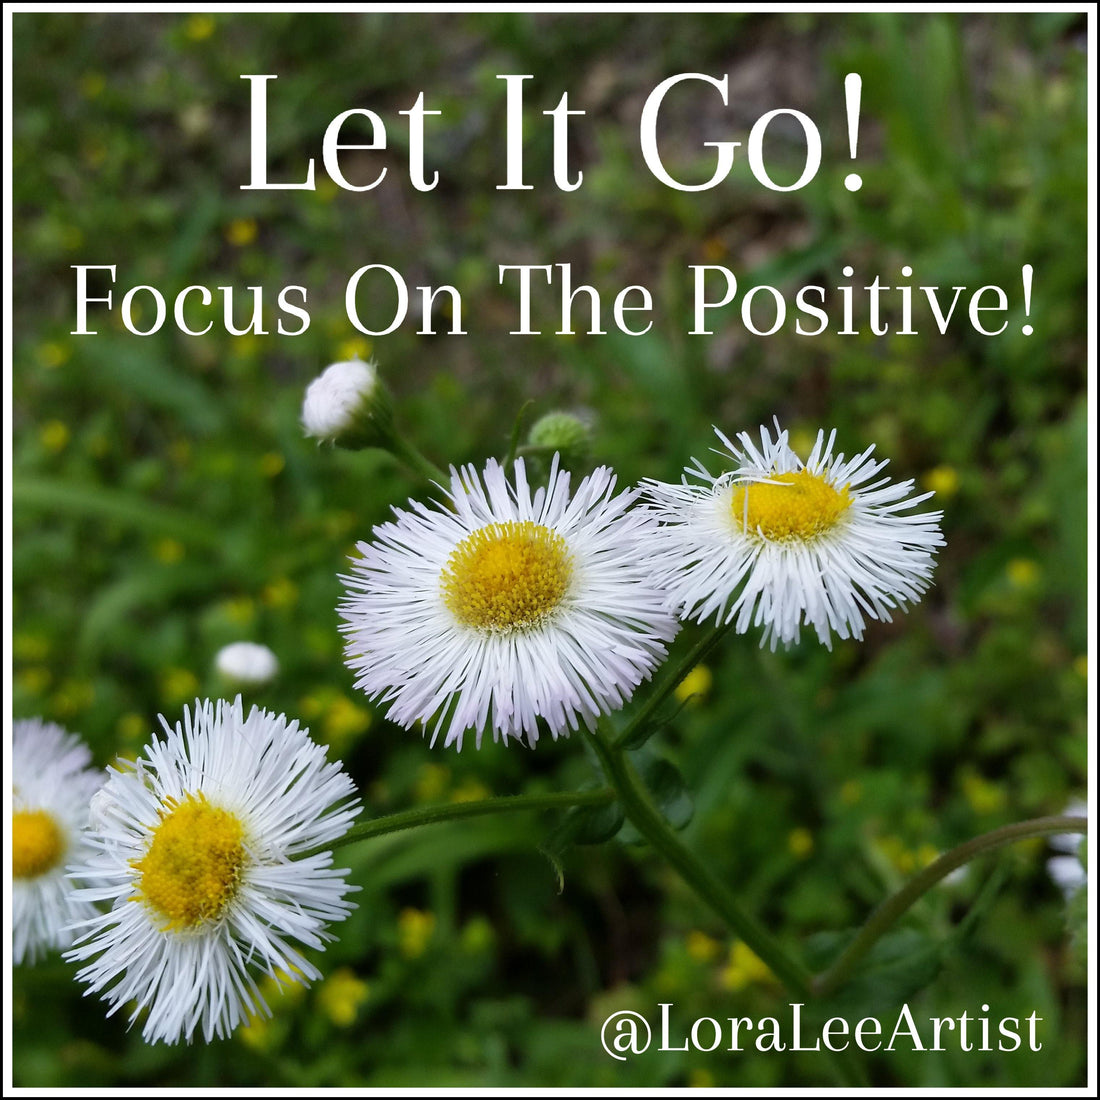 Focus On The Positive and Let The Rest Go! - LoraLeeArtist